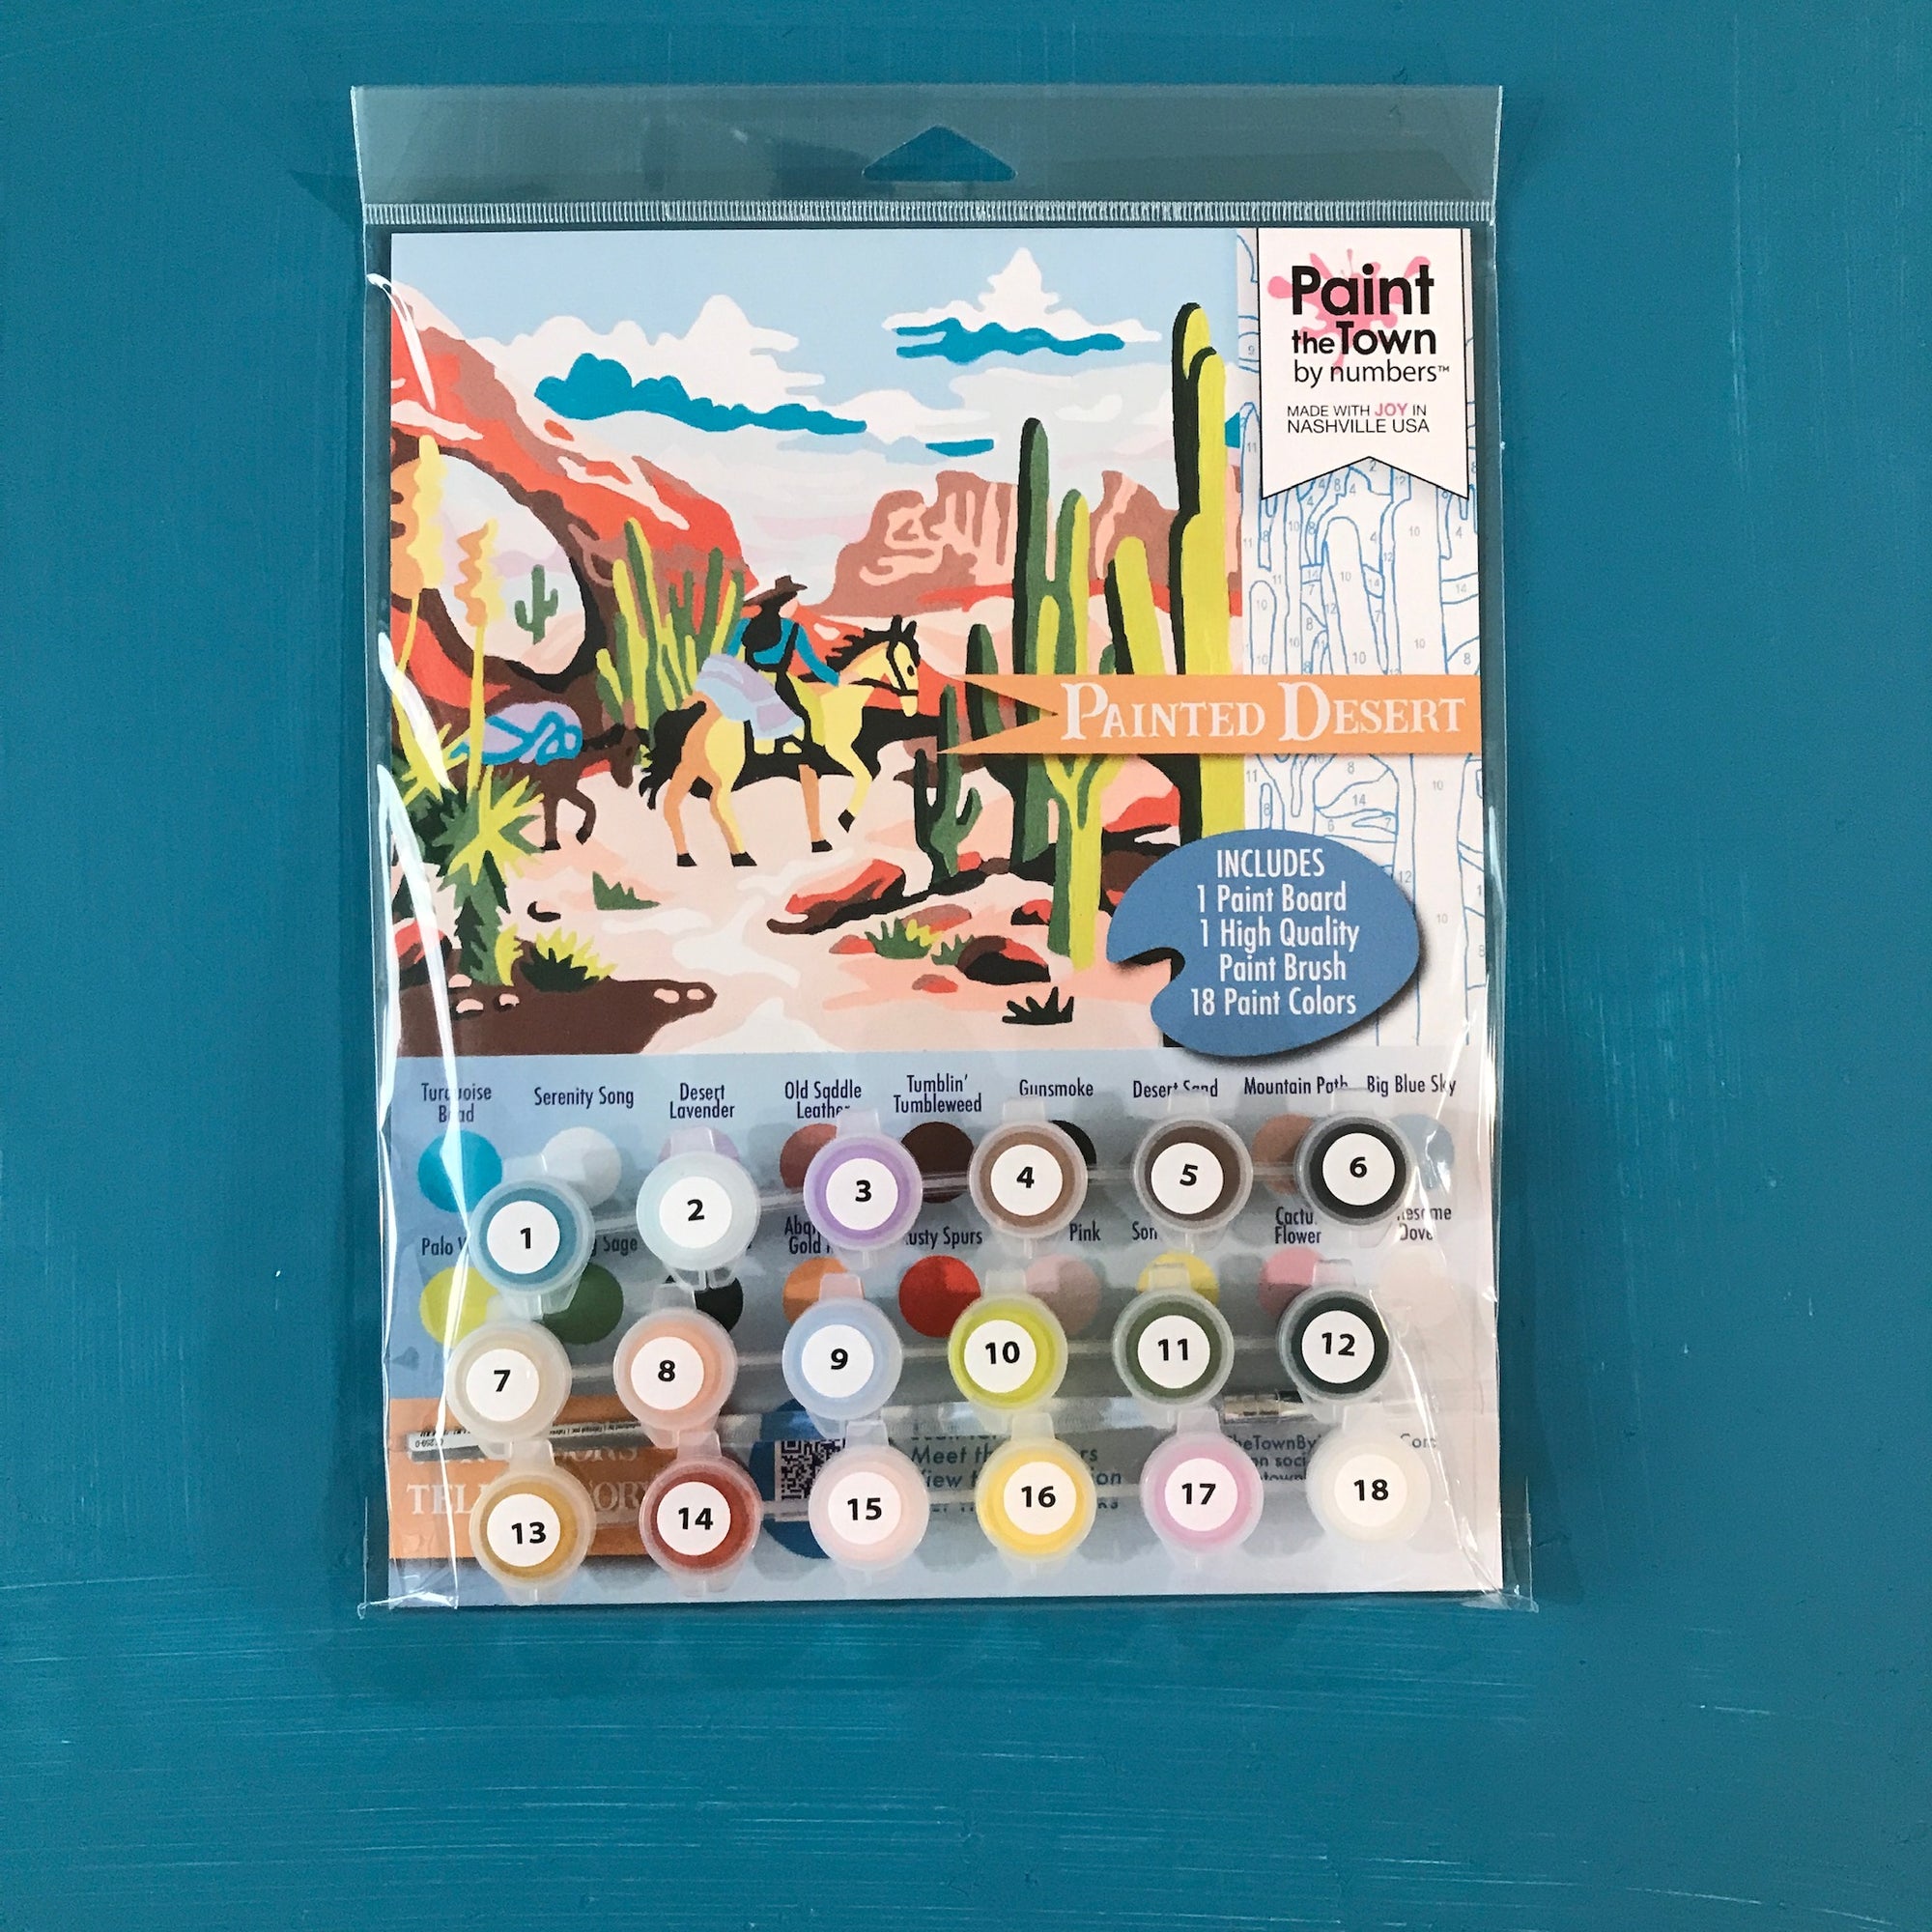 Happy Thoughts Paint by Number Kit; 8”x10” – Paint the Town by Numbers